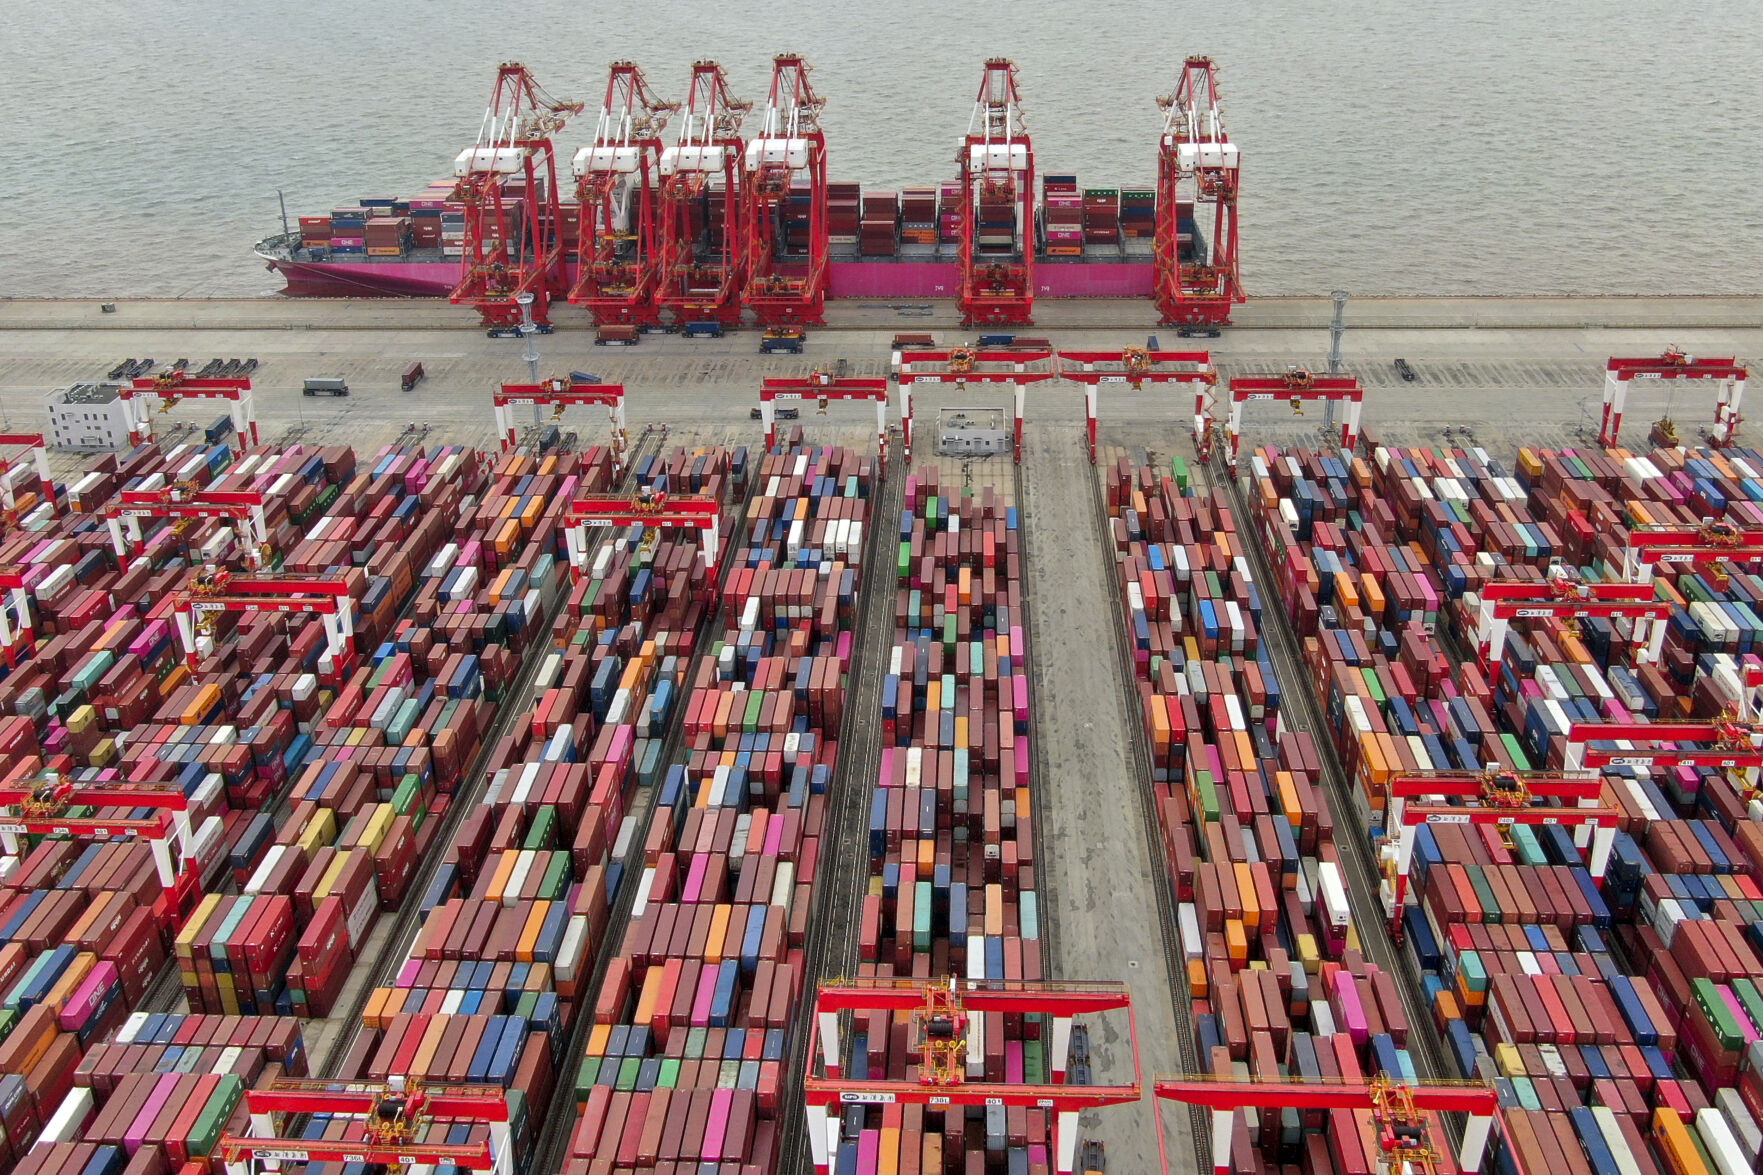 <p>FILE - The Yangshan container port is seen in an aerial view in Shanghai, China on July 10, 2021. China’s exports tumbled in June, 2023, by 12.4% compared with a year earlier amid weaker global demand and higher inflation. (Chinatopix via AP, File)</p>   PHOTO CREDIT: CHINATOPIX